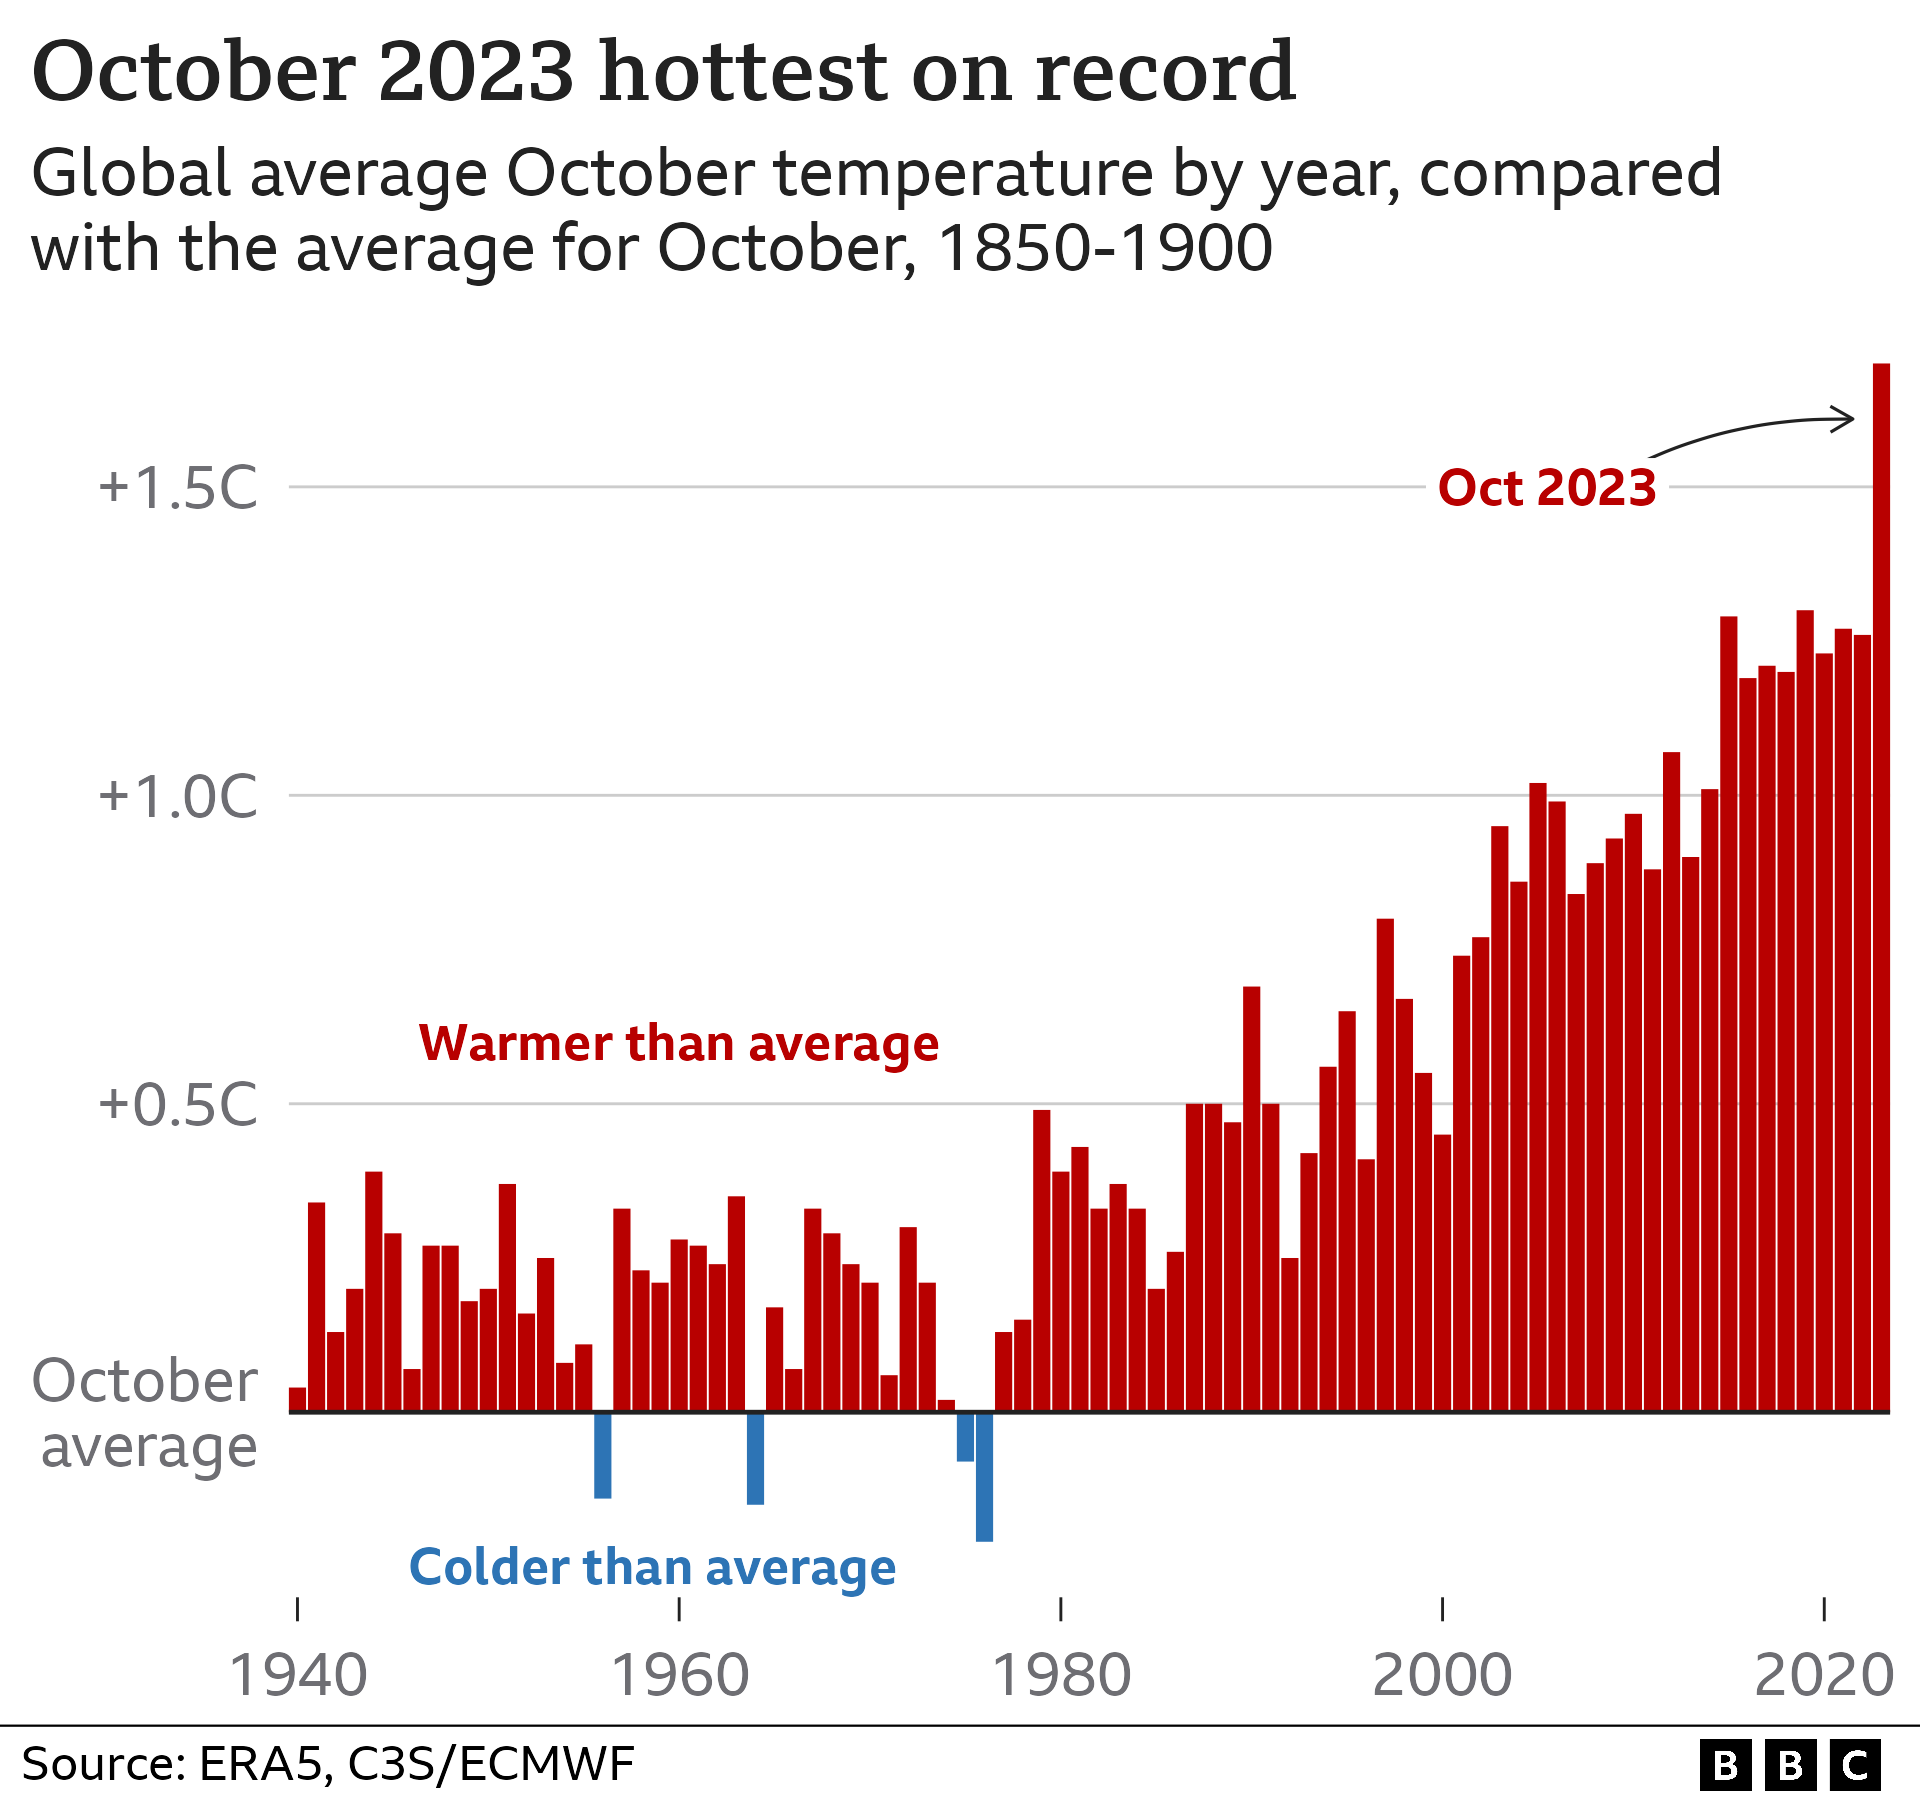 Bar chart showing the difference between the average October temperature each year against the 1850-1900 reference period. October 2023 is about 1.7C above the average